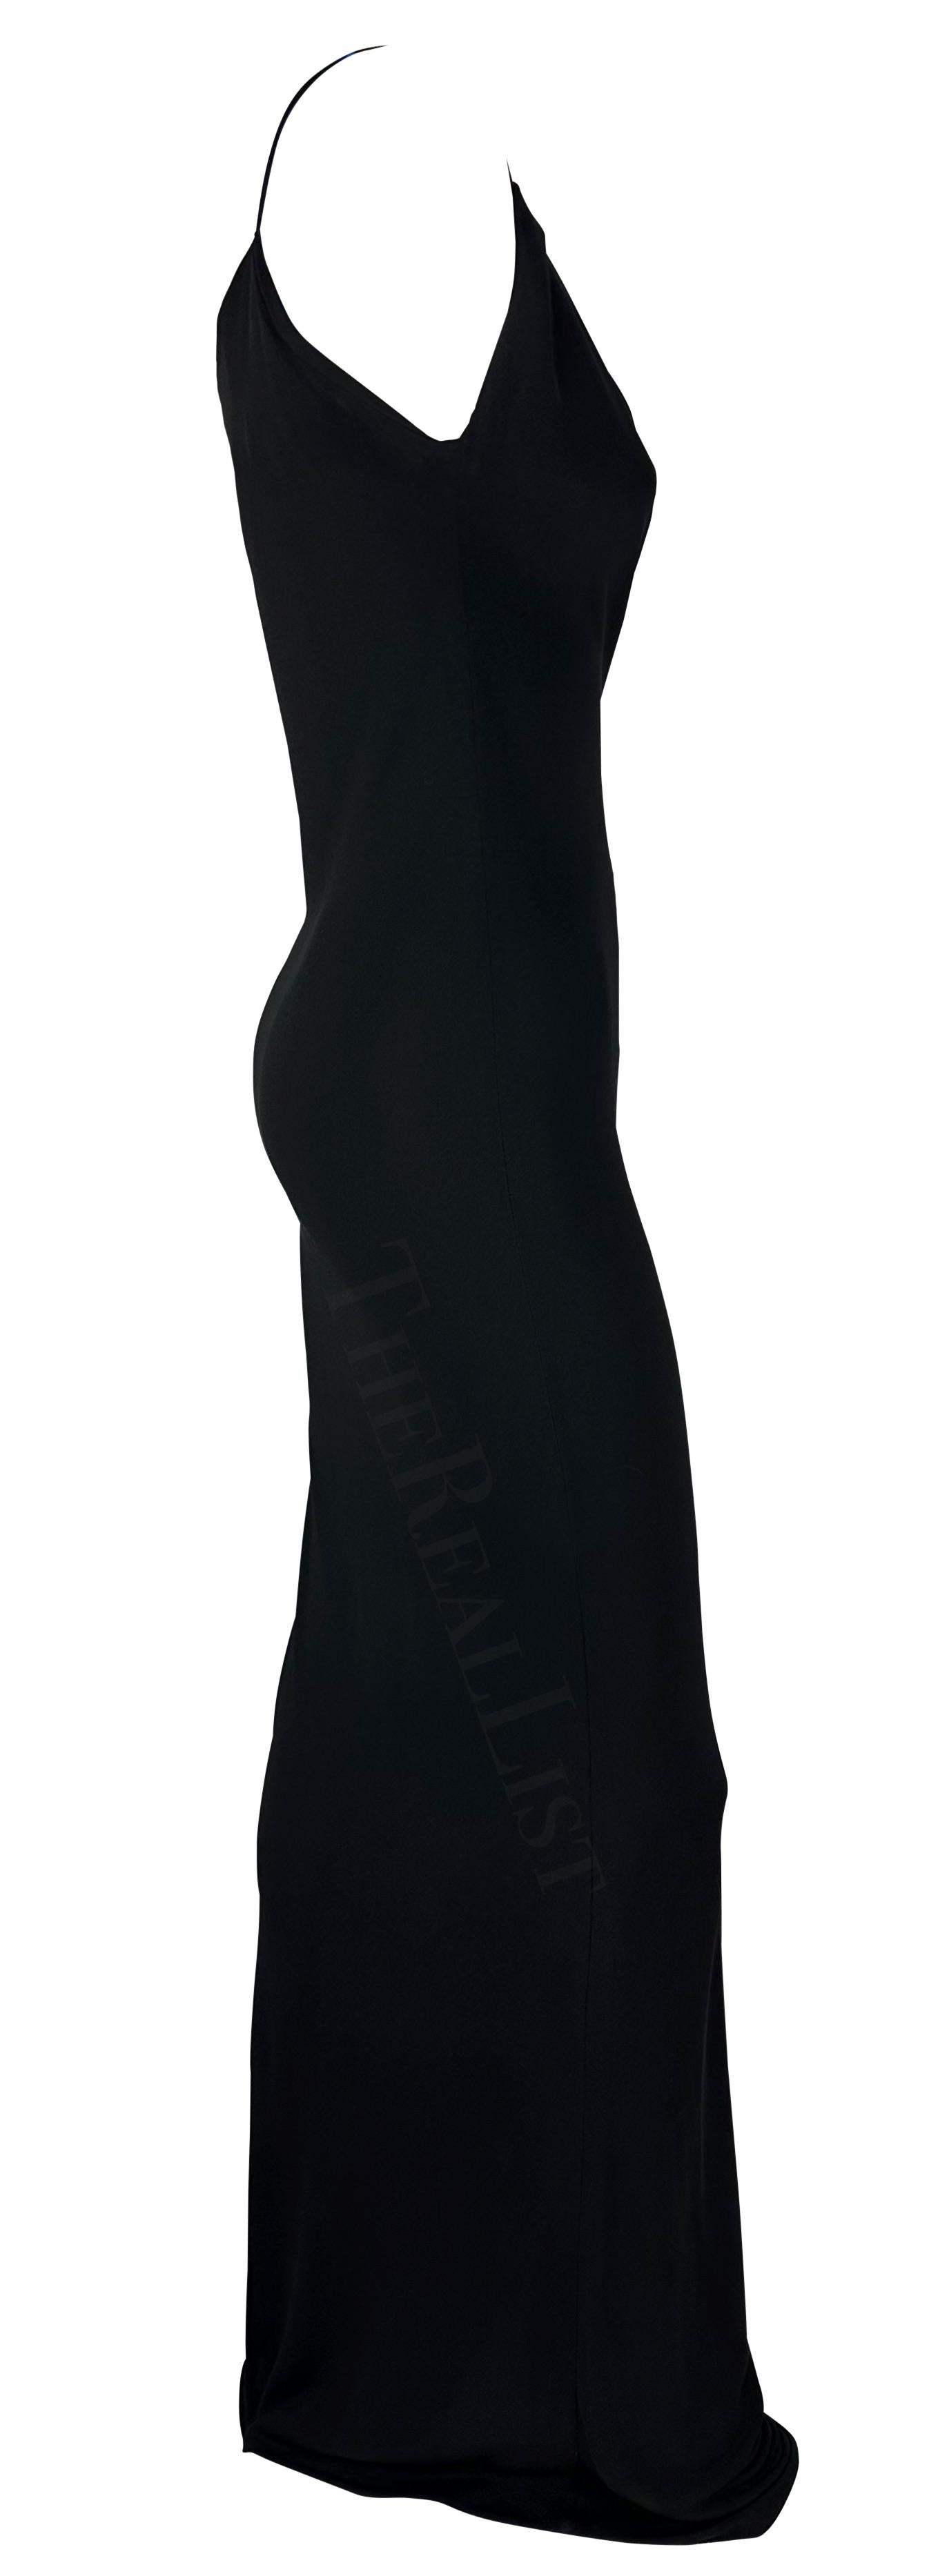 S/S 1997 Gucci by Tom Ford Plunging Cowl Black Slip Bodycon Gown  For Sale 3